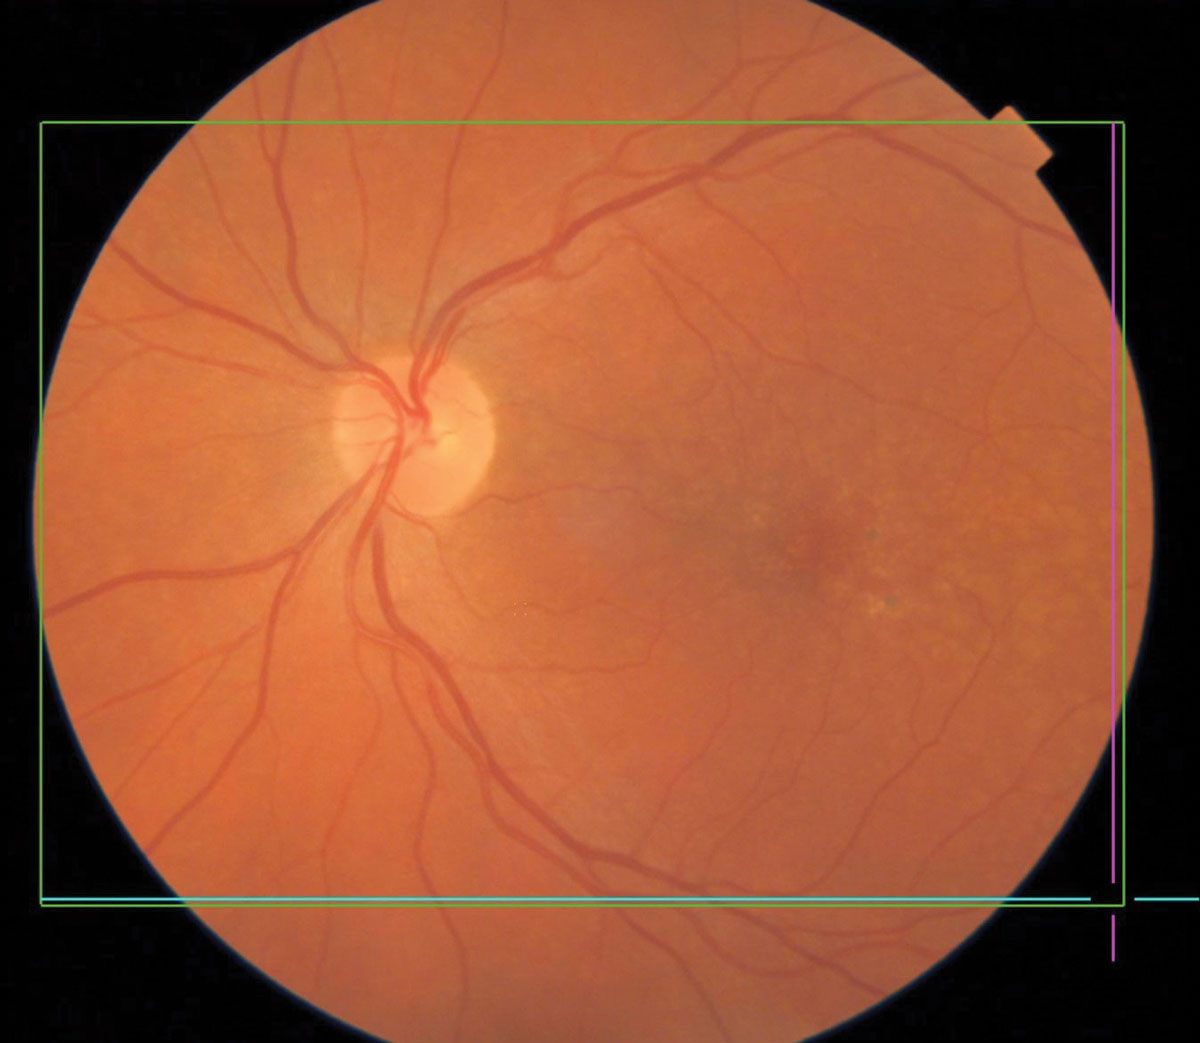 Pigmentary changes in dry AMD.